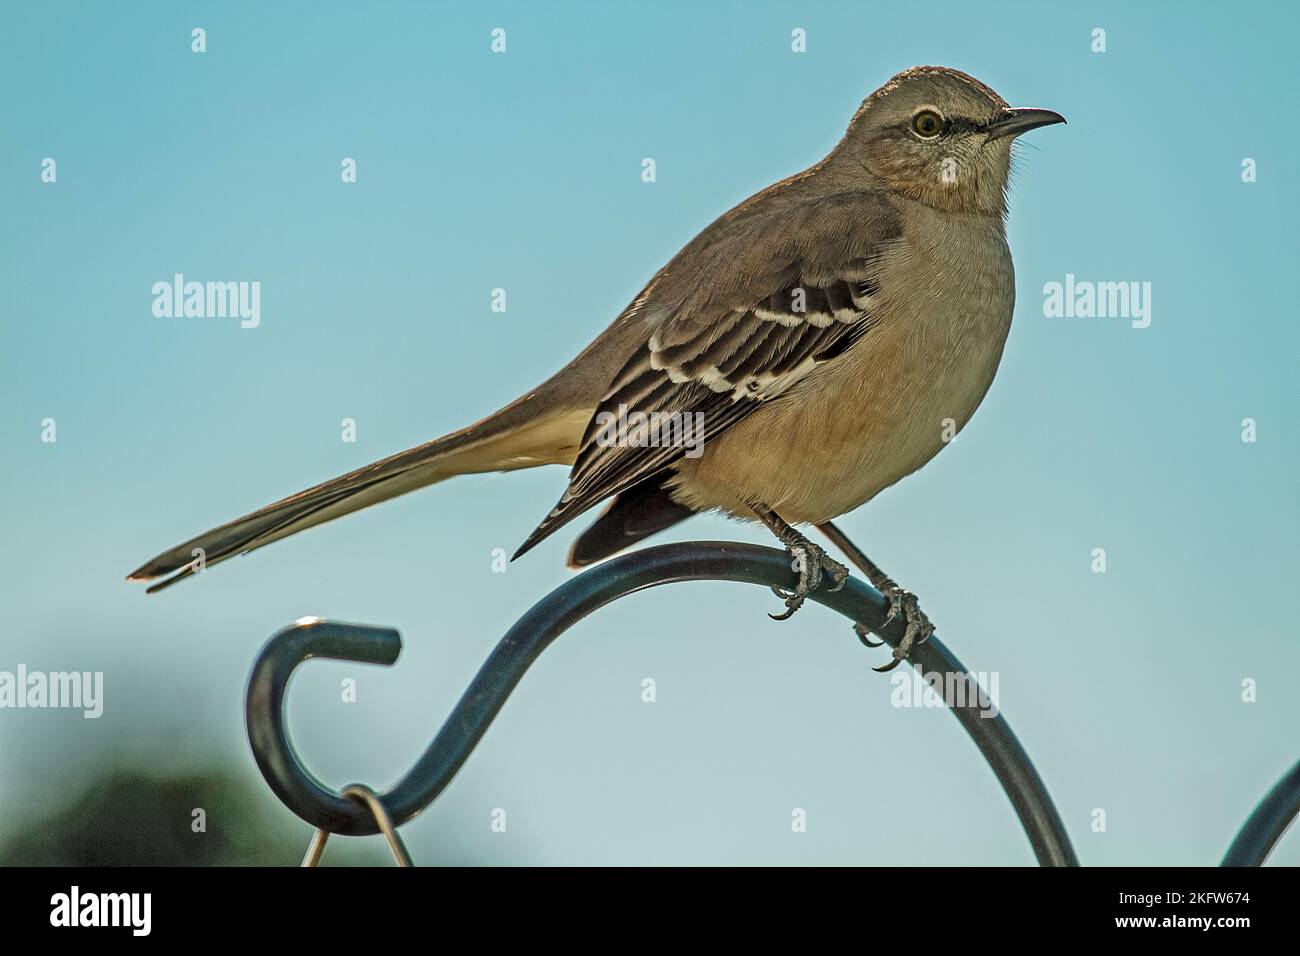 Northern Mocking Bird Perched on top of Pole with blue skies Stock Photo